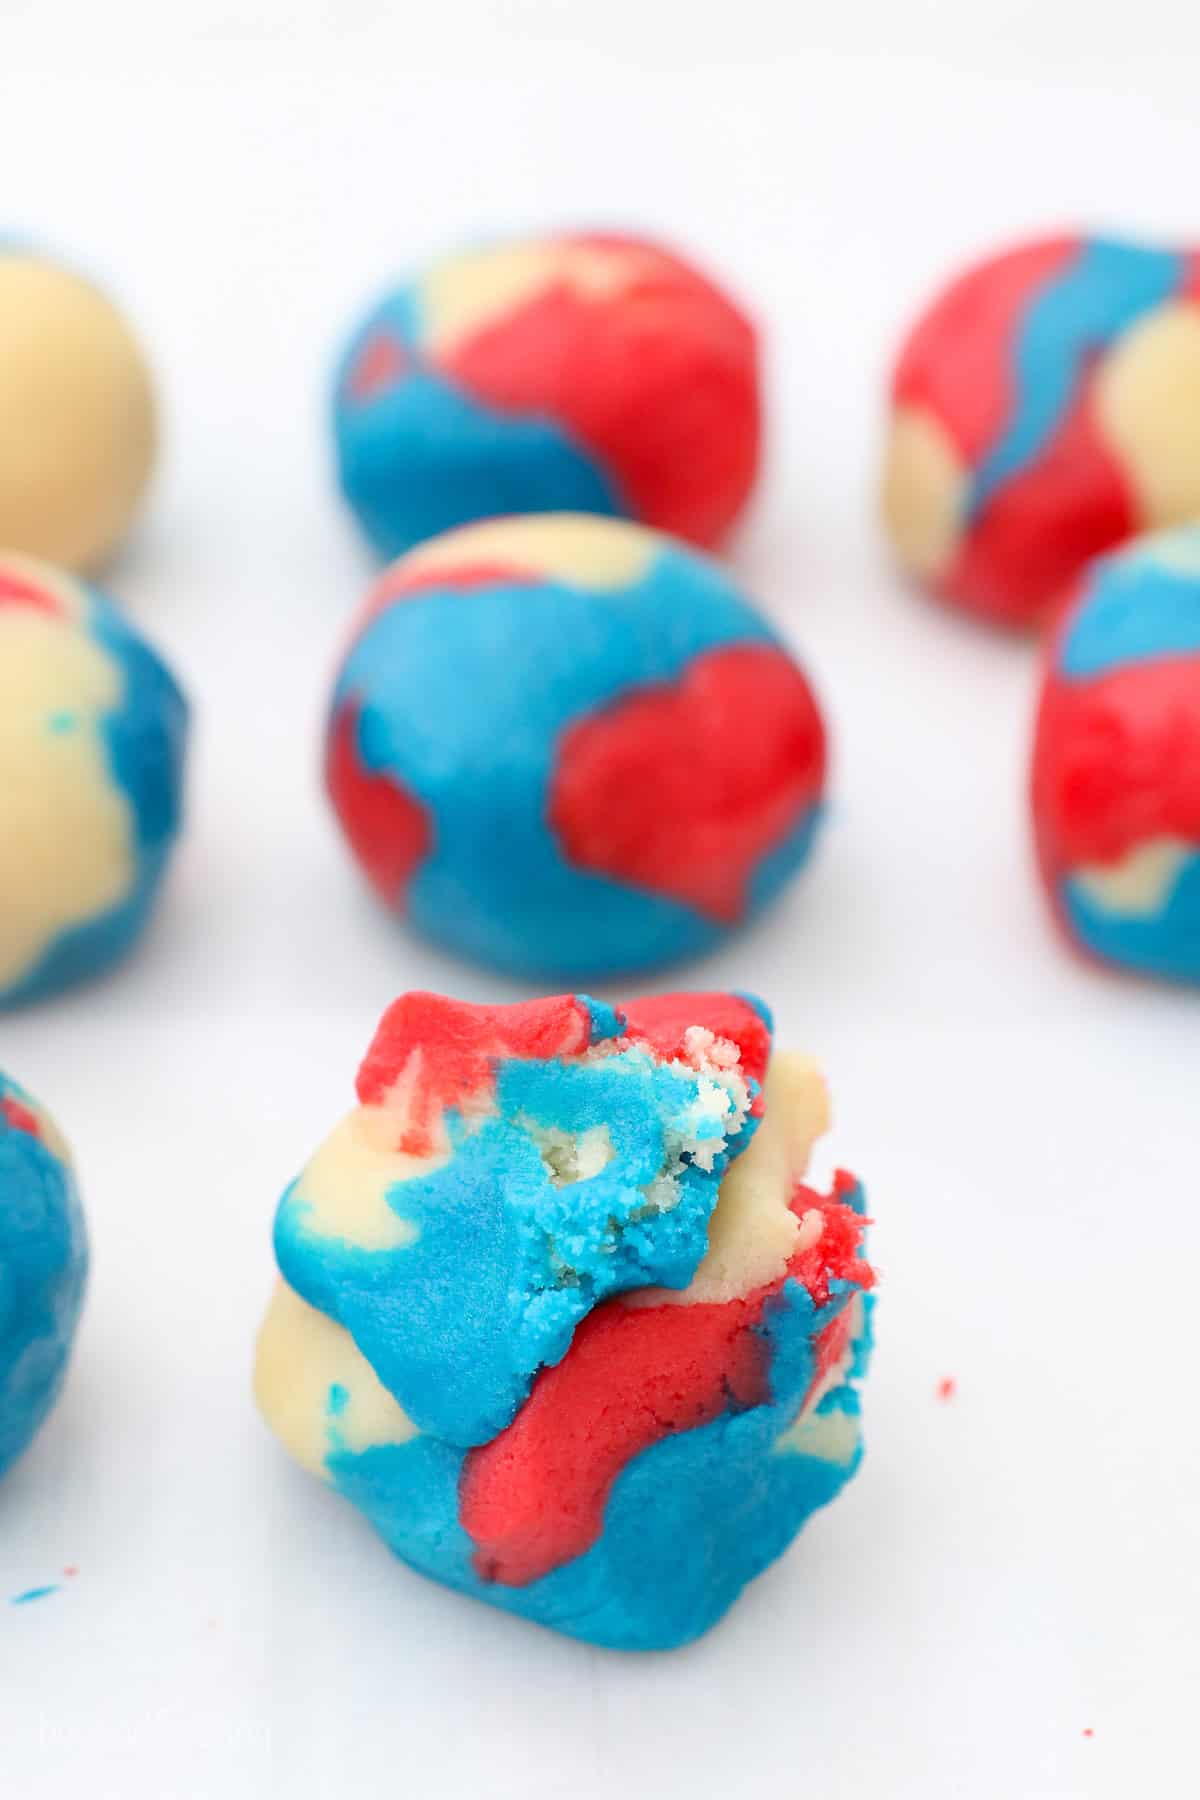 Red, white and blue tye-dyed cookie dough balls arranged in rows.